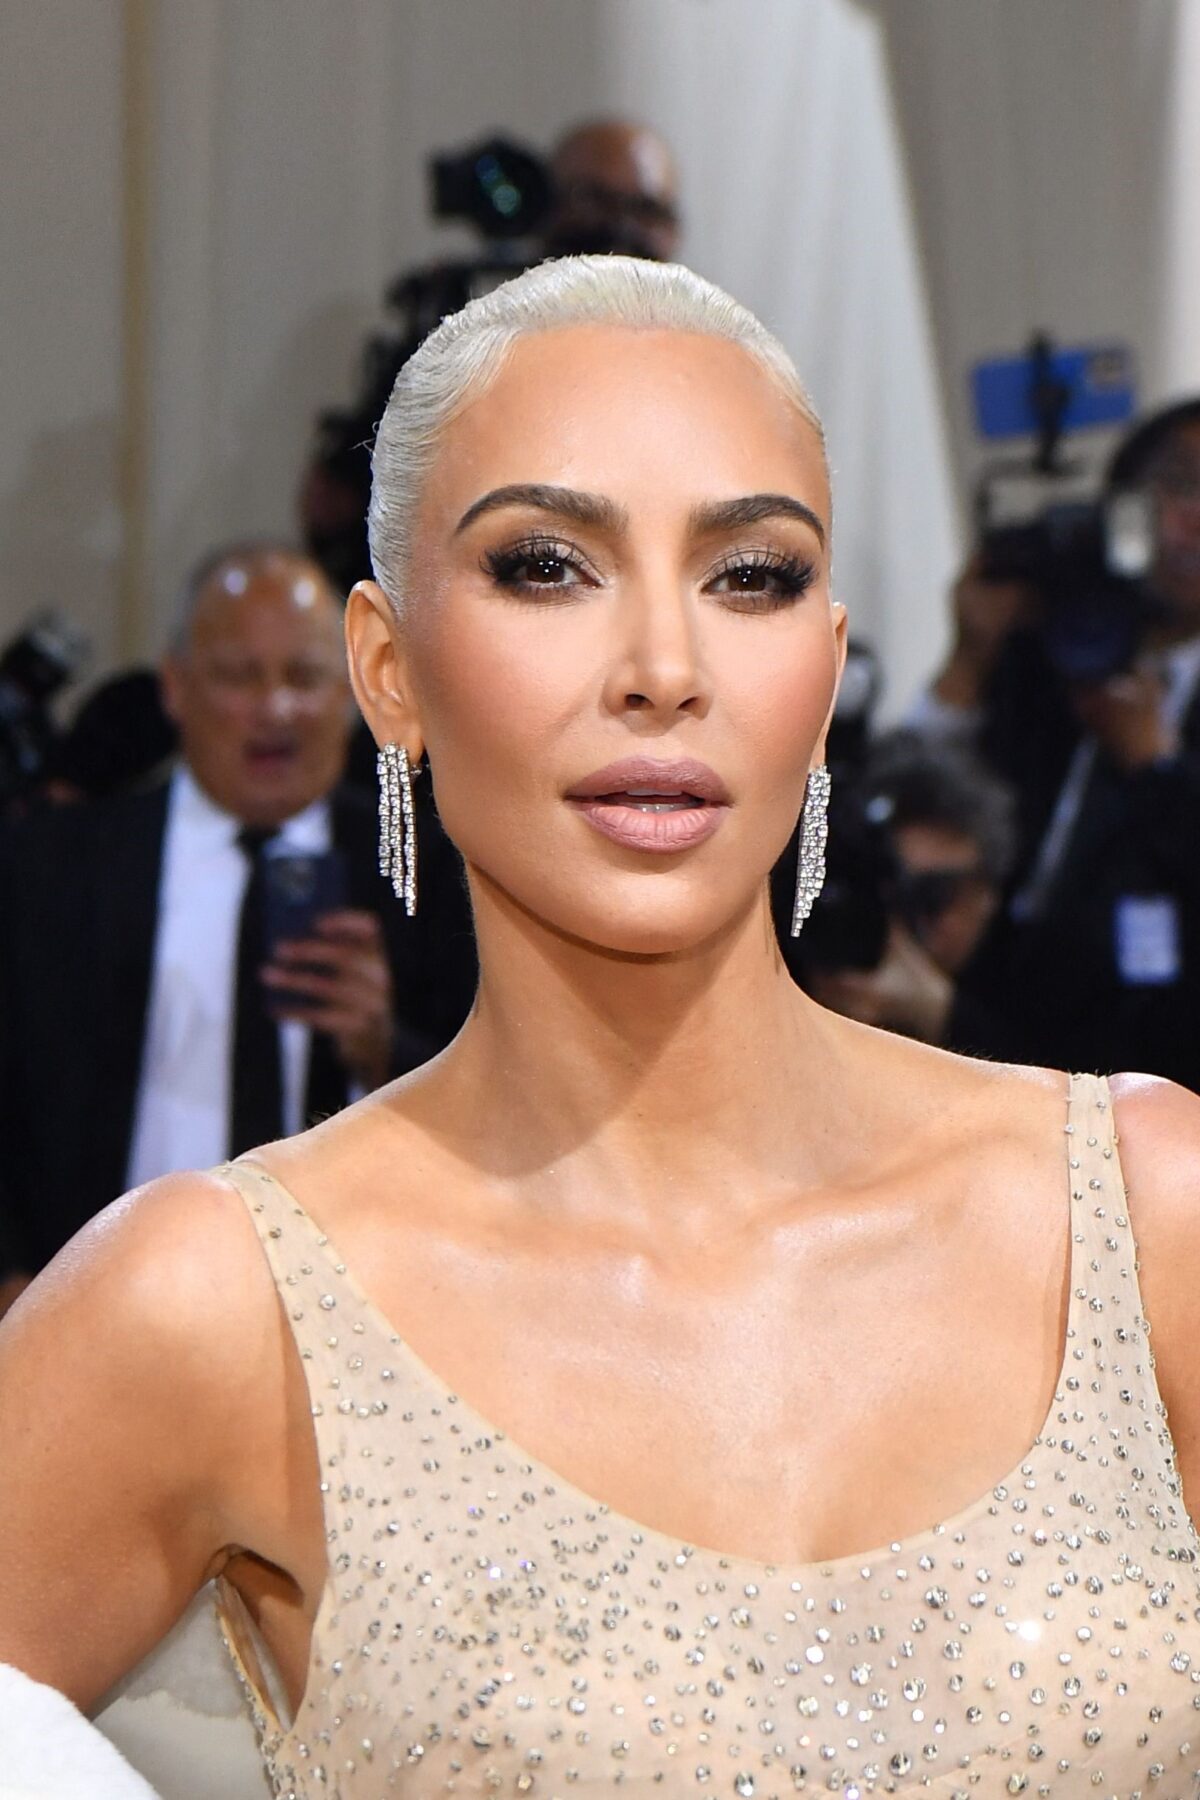 US socialite Kim Kardashian arrives for the 2022 Met Gala at the Metropolitan Museum of Art on May 2, 2022, in New York. - The Gala raises money for the Metropolitan Museum of Art's Costume Institute. The Gala's 2022 theme is 